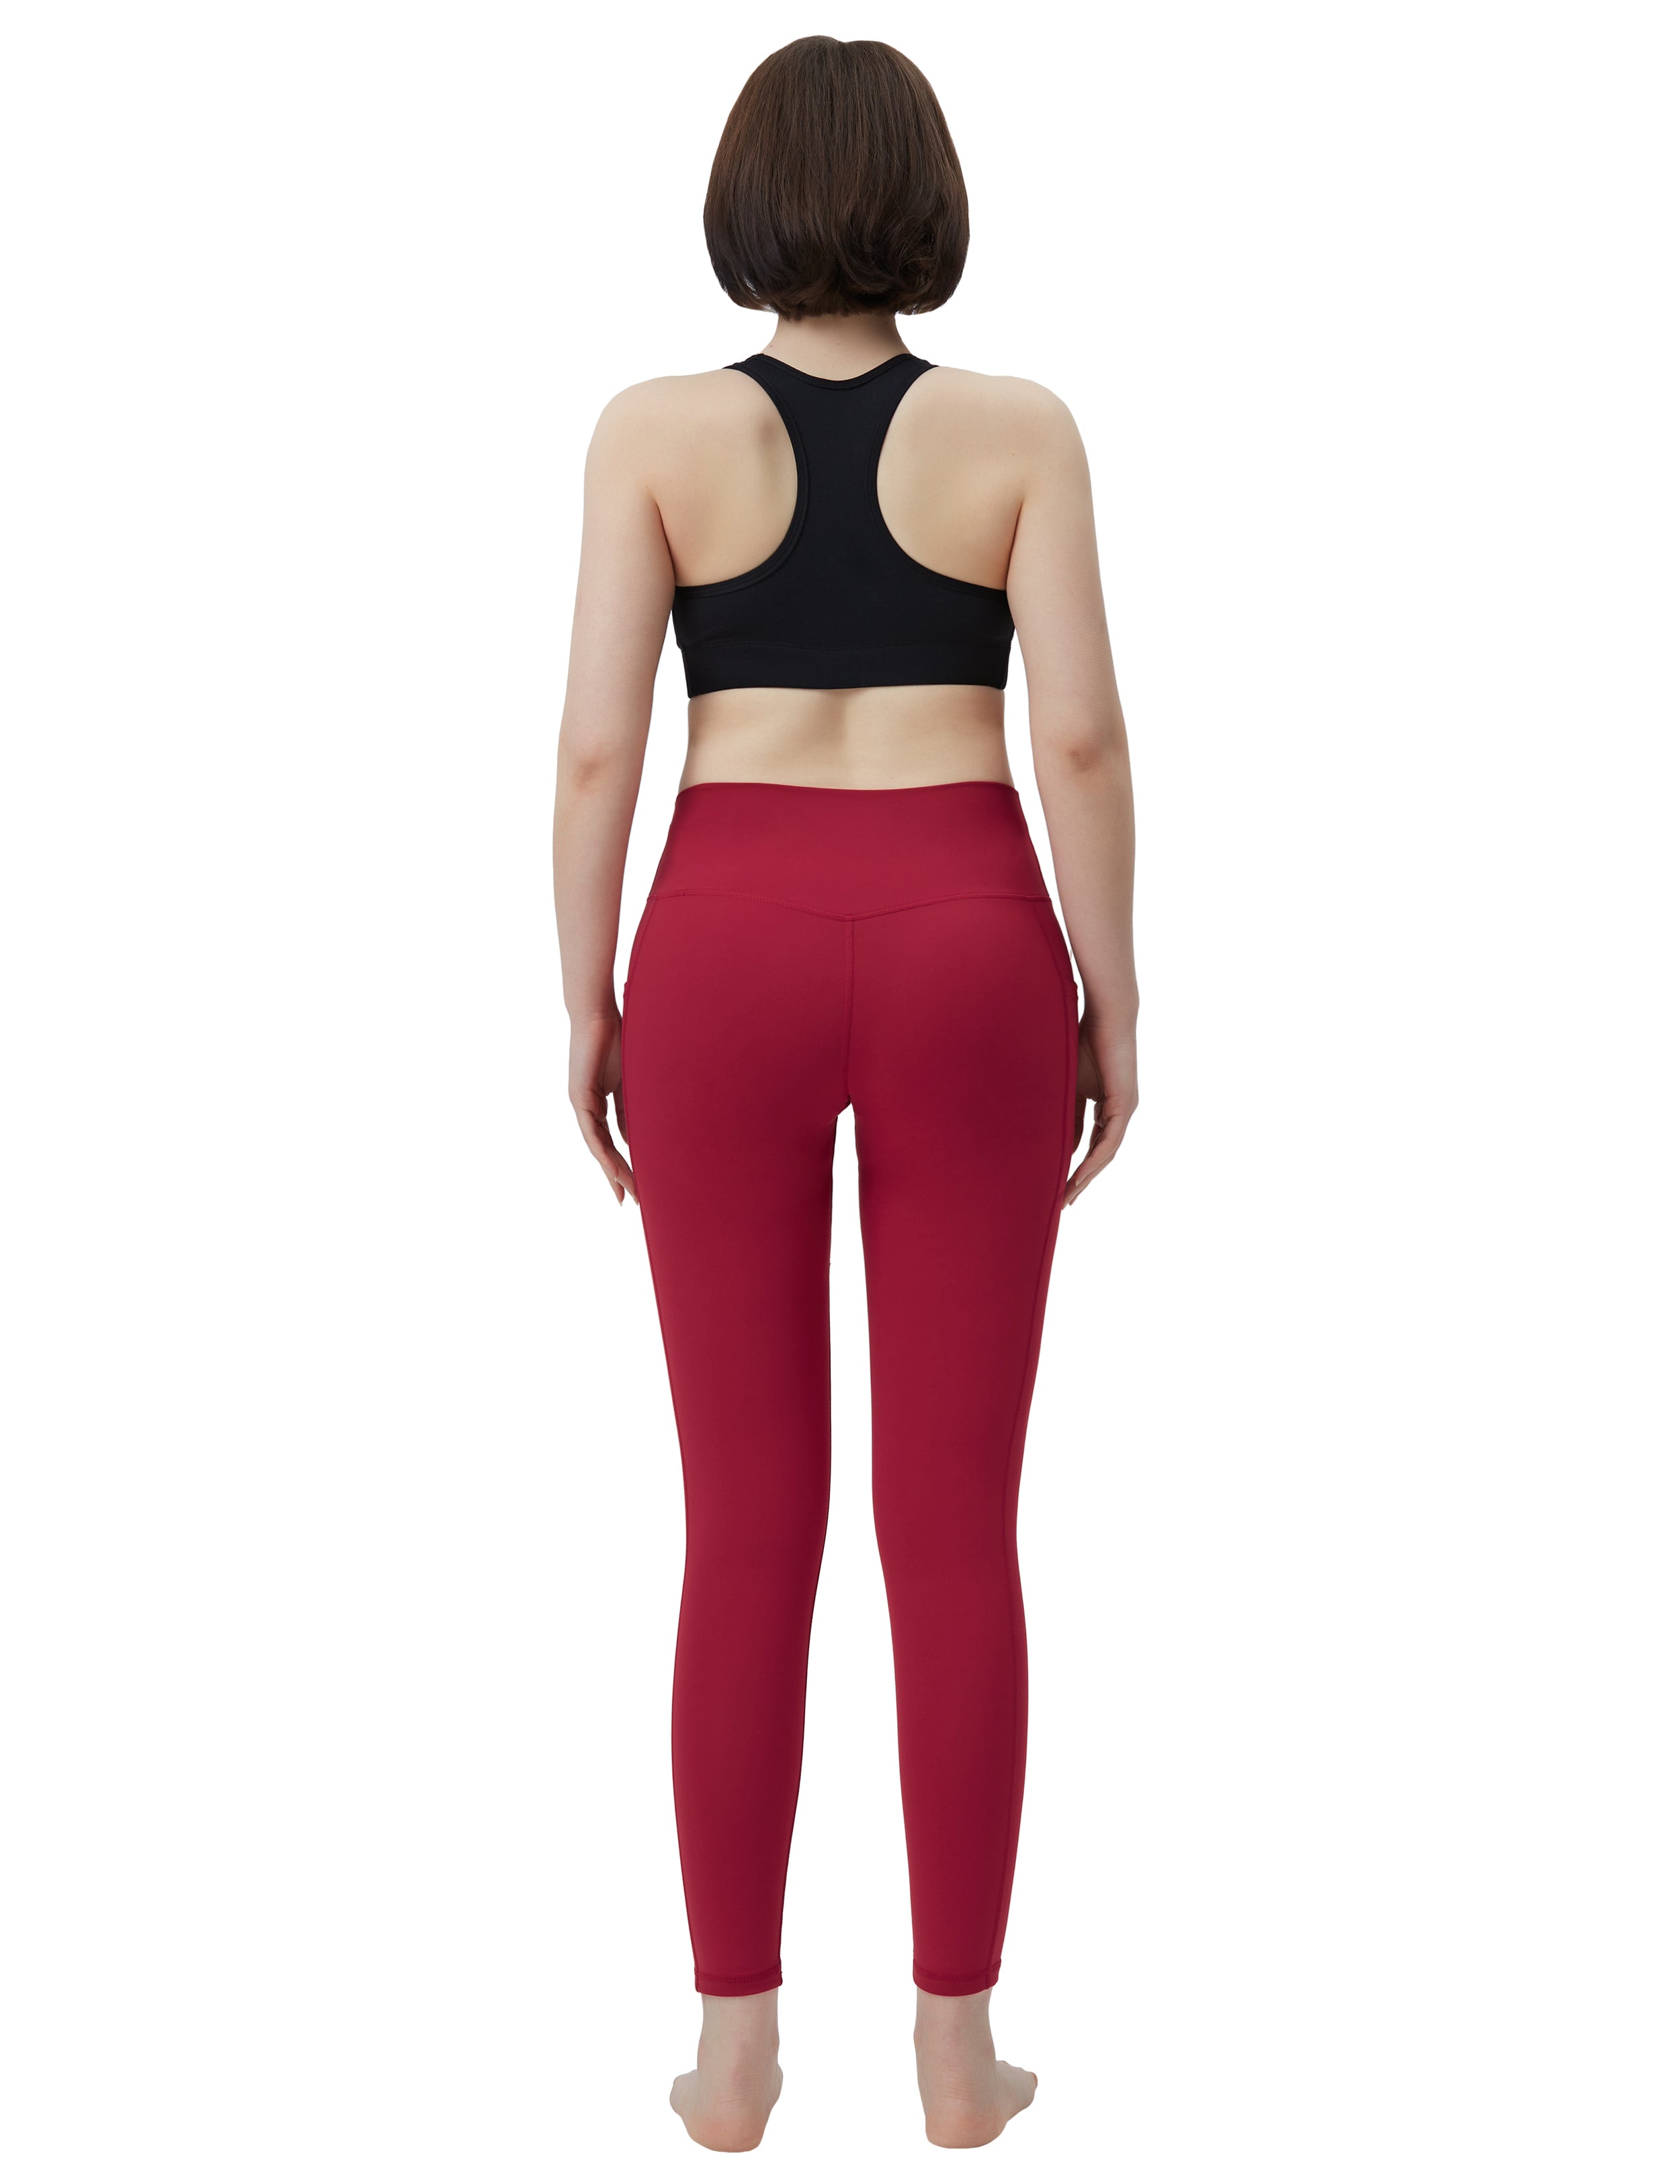 High Waisted Yoga Pants 7/8 Length Leggings with Pockets red